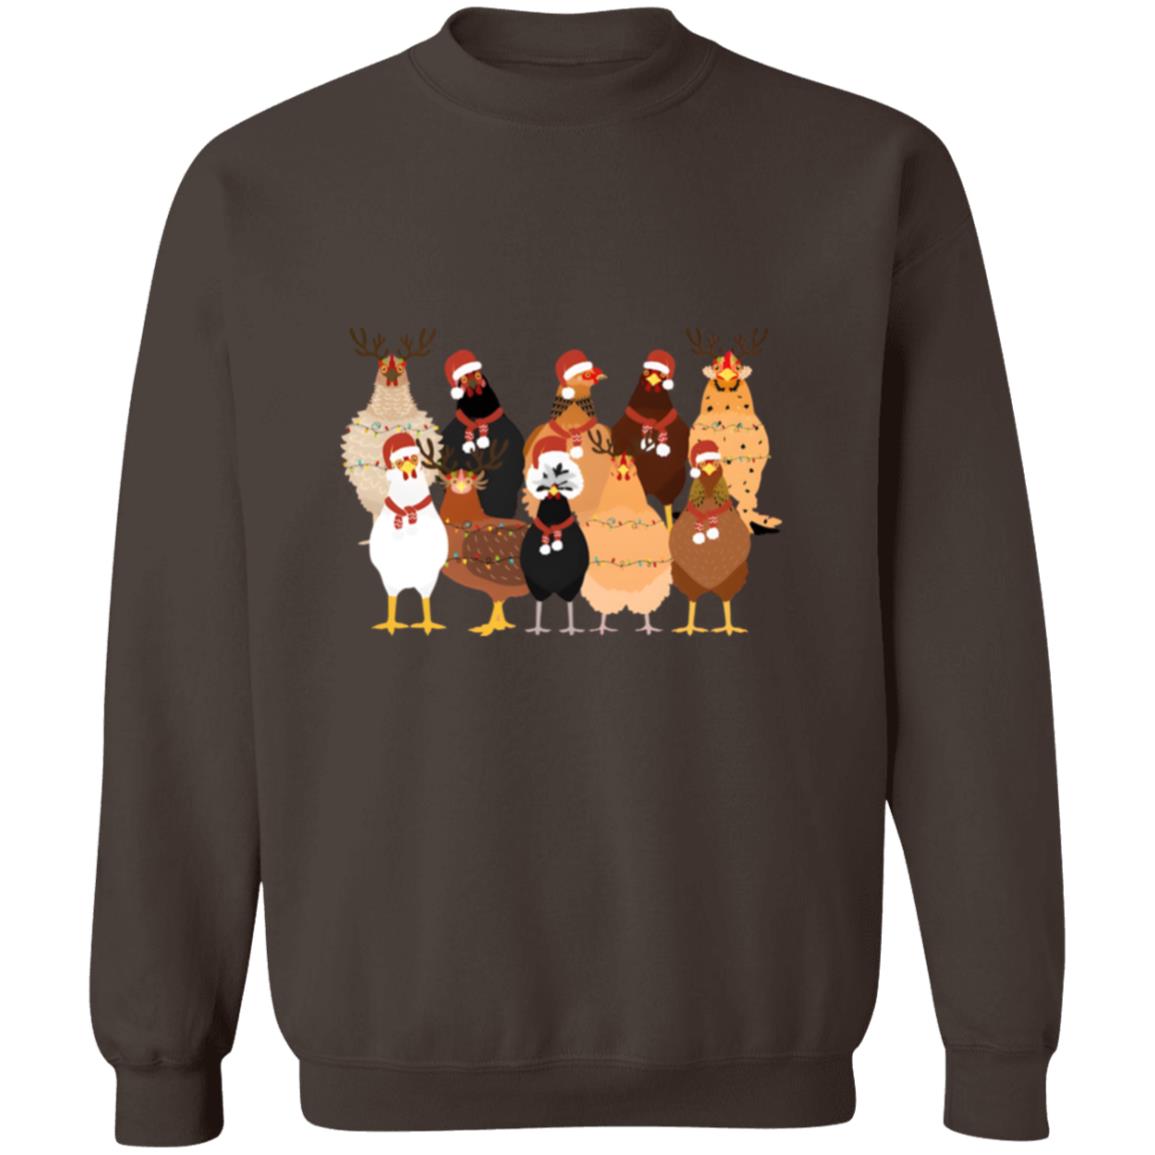 Get trendy with Christmas Chickens Crewneck Pullover Sweatshirt - Sweatshirts available at Good Gift Company. Grab yours for $28 today!